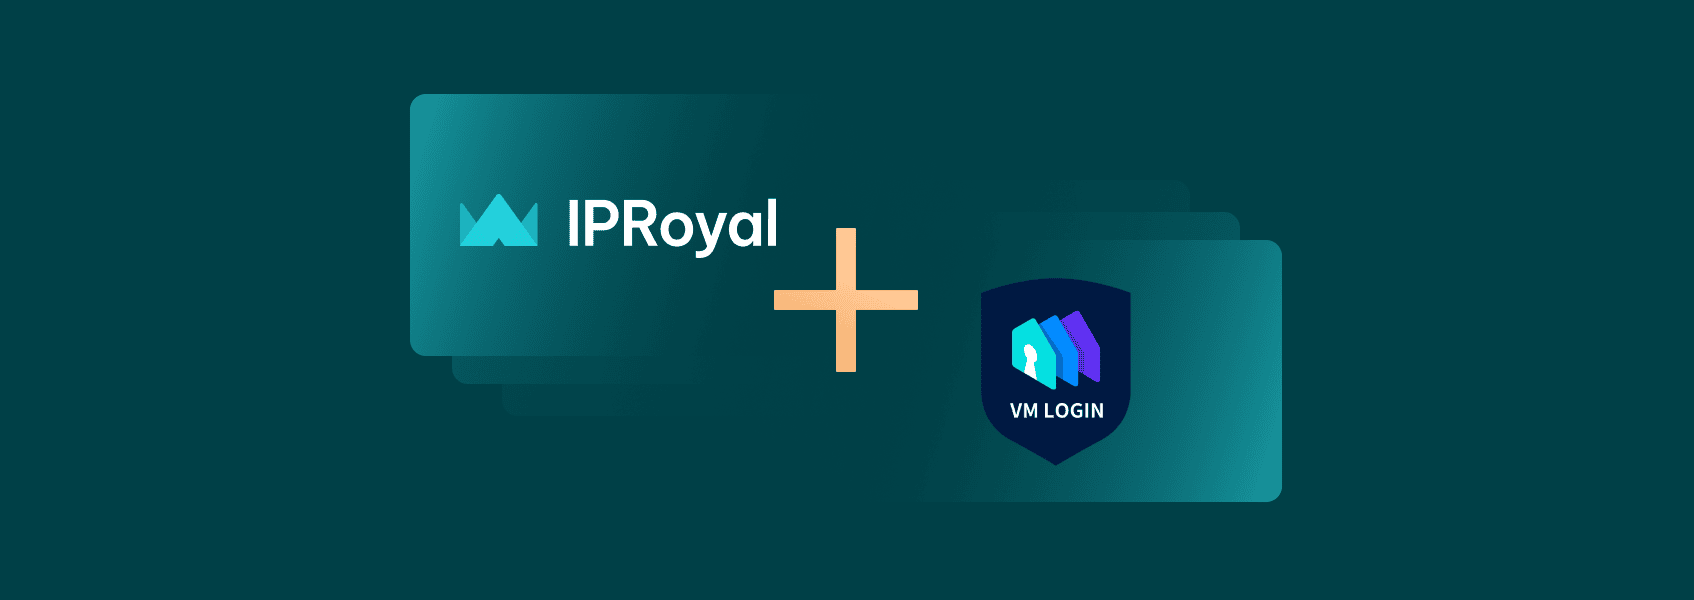 How to Set Up a VMLogin Browser Proxy With IPRoyal